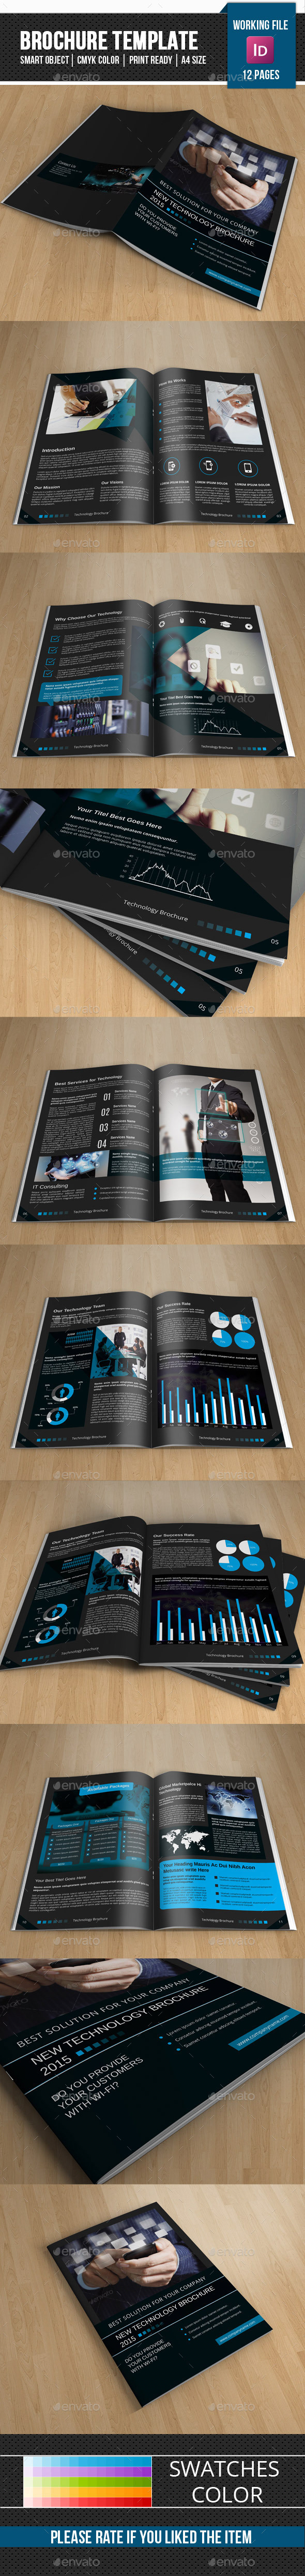 Technology brocure corporate business company template InDesign